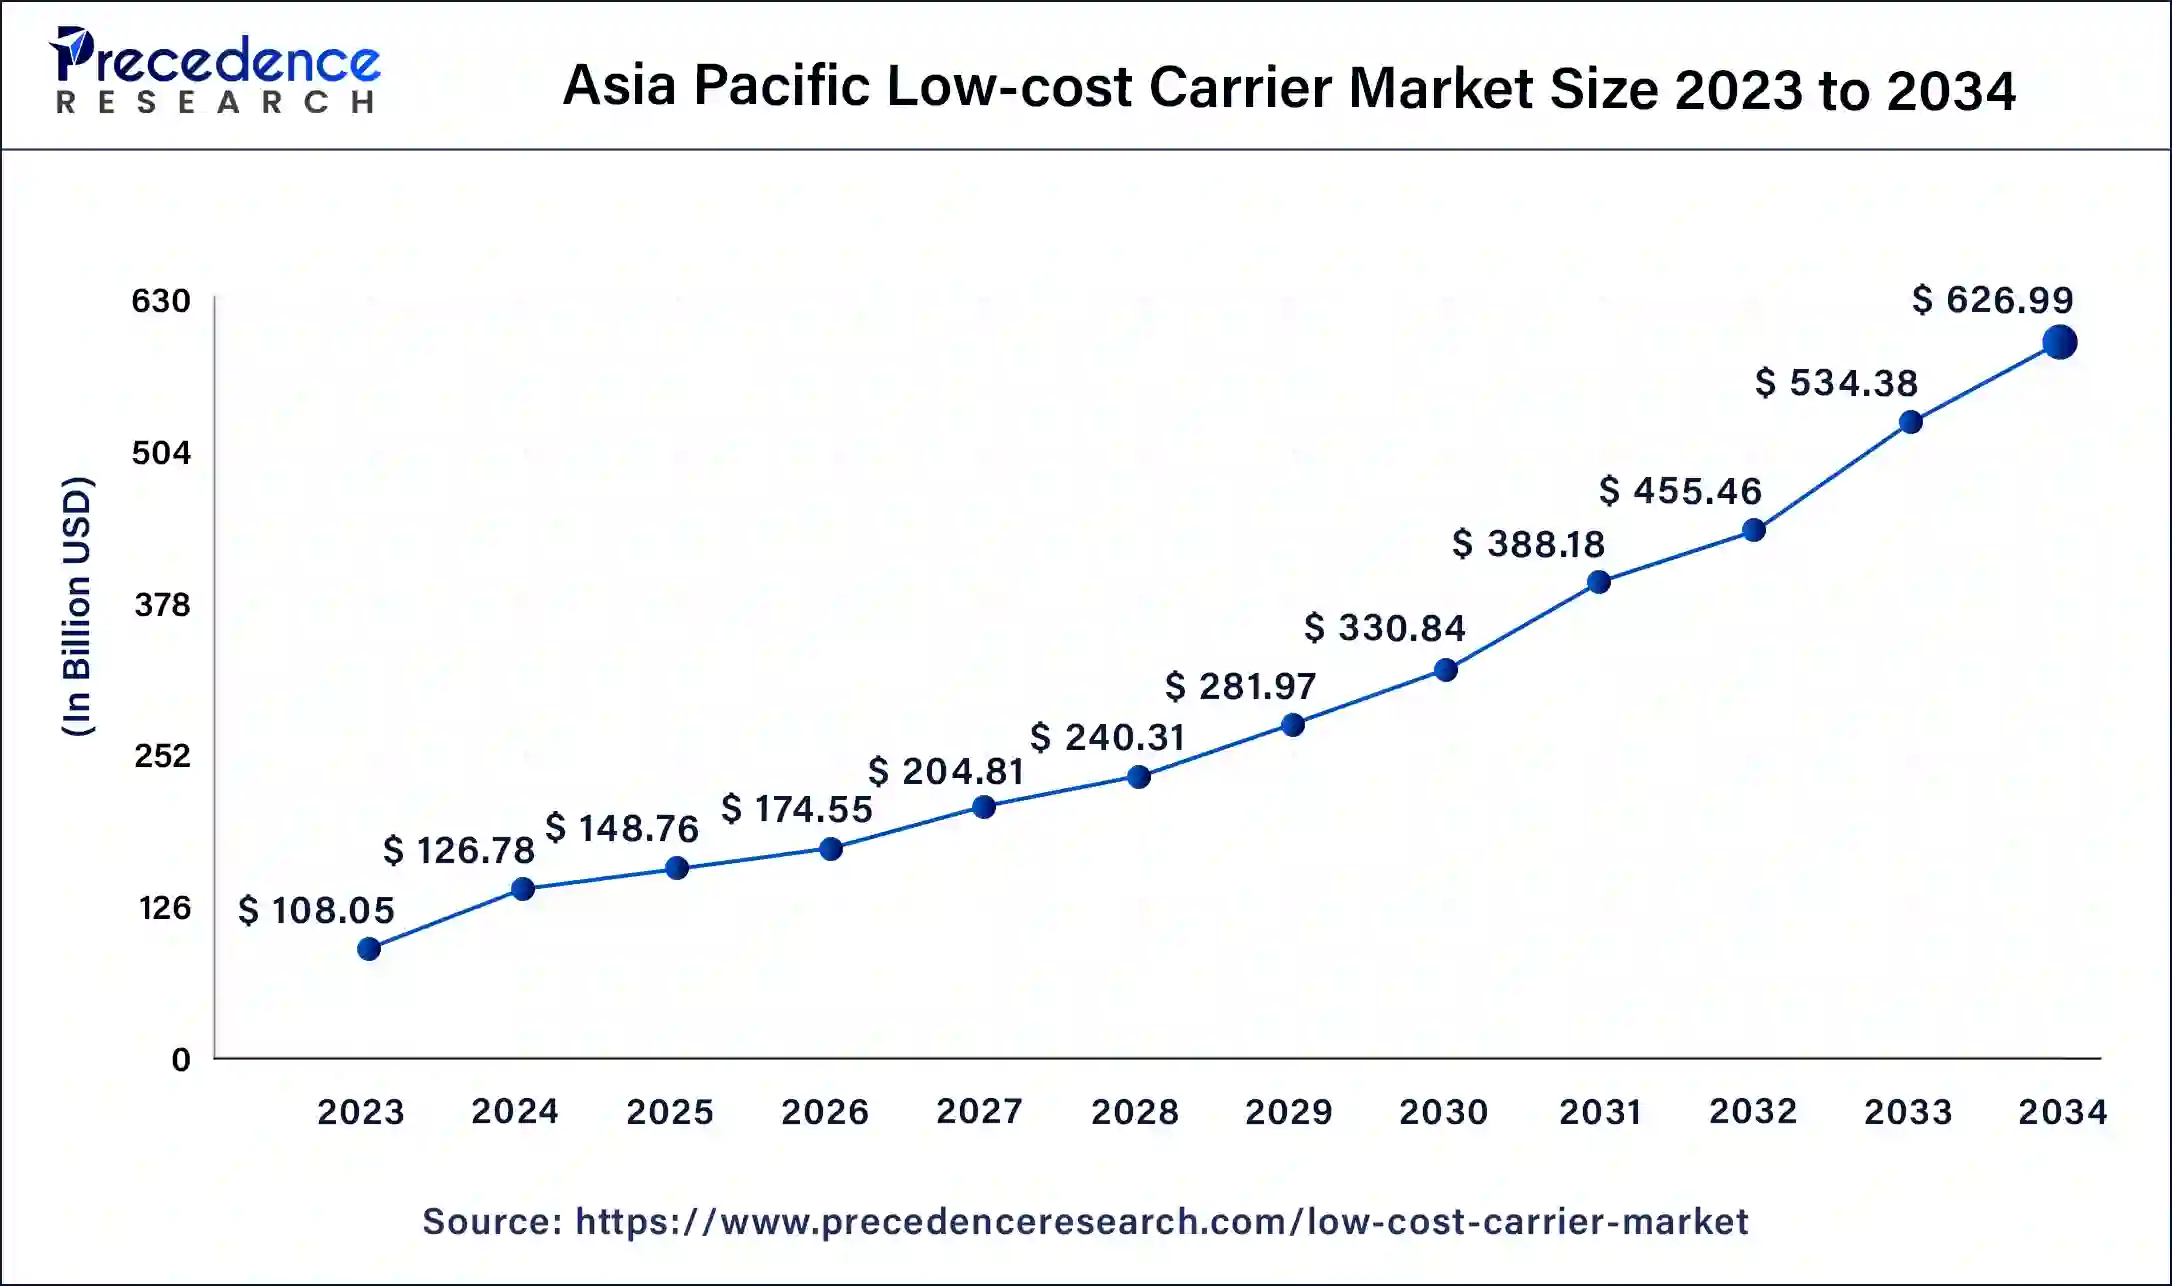 Asia Pacific Low-cost Carrier Market Size 2024 to 2034